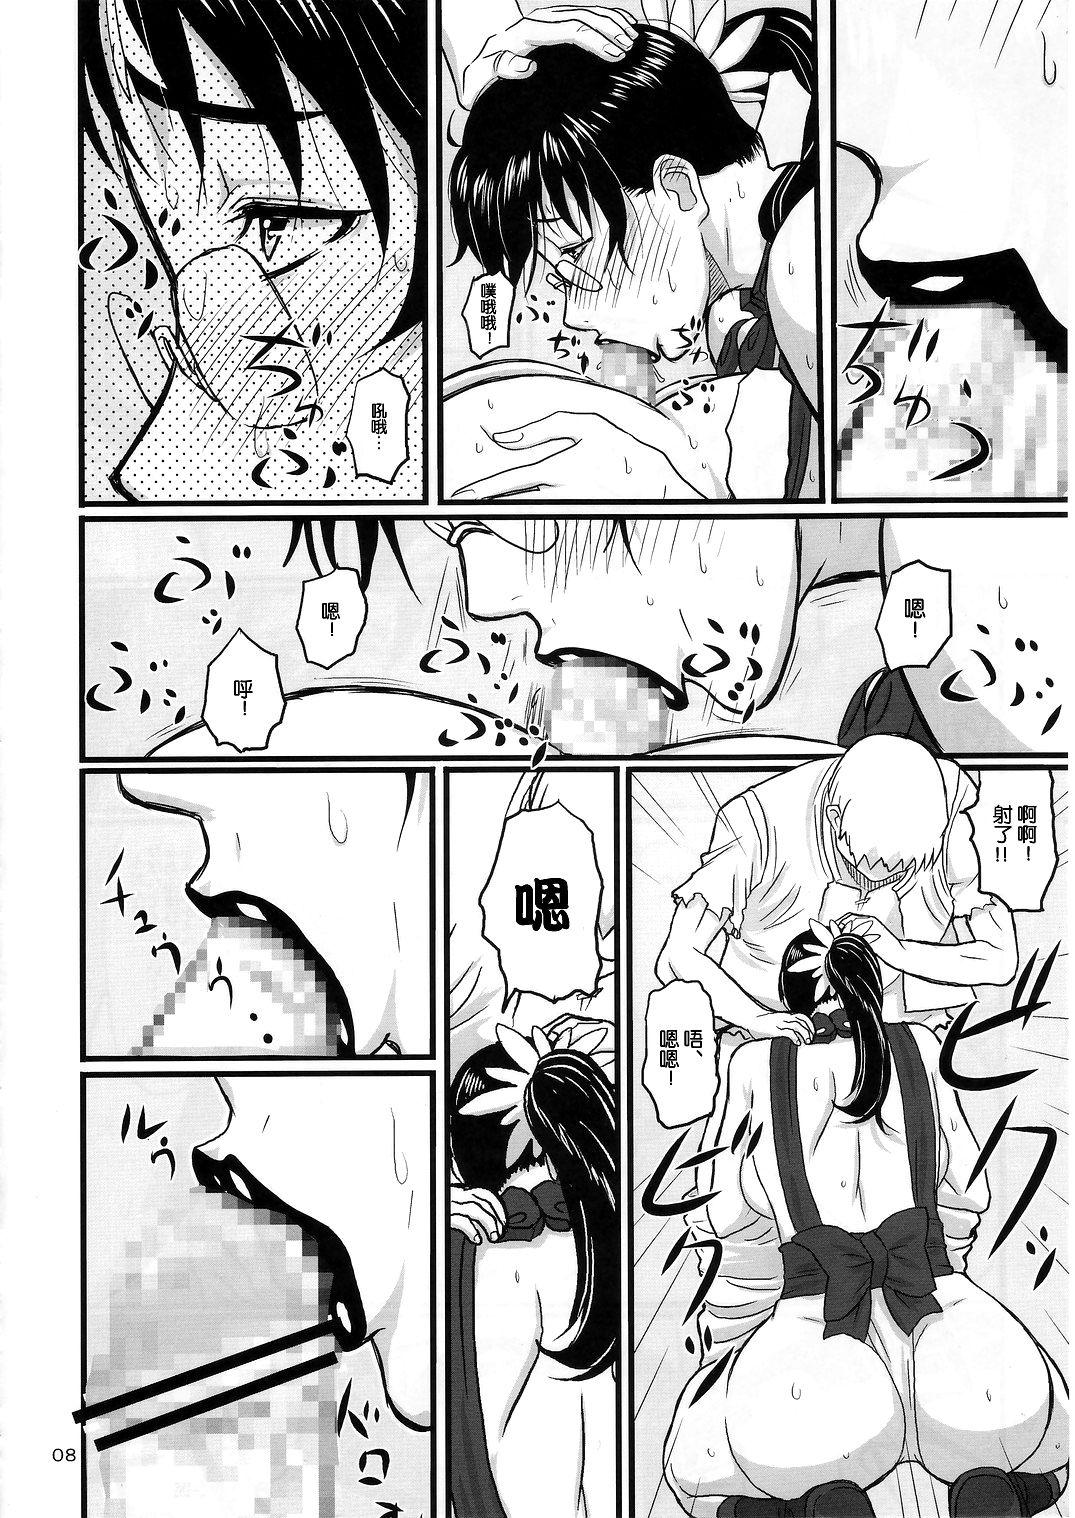 Couch Package Meat - Queens blade Thylinh - Page 8